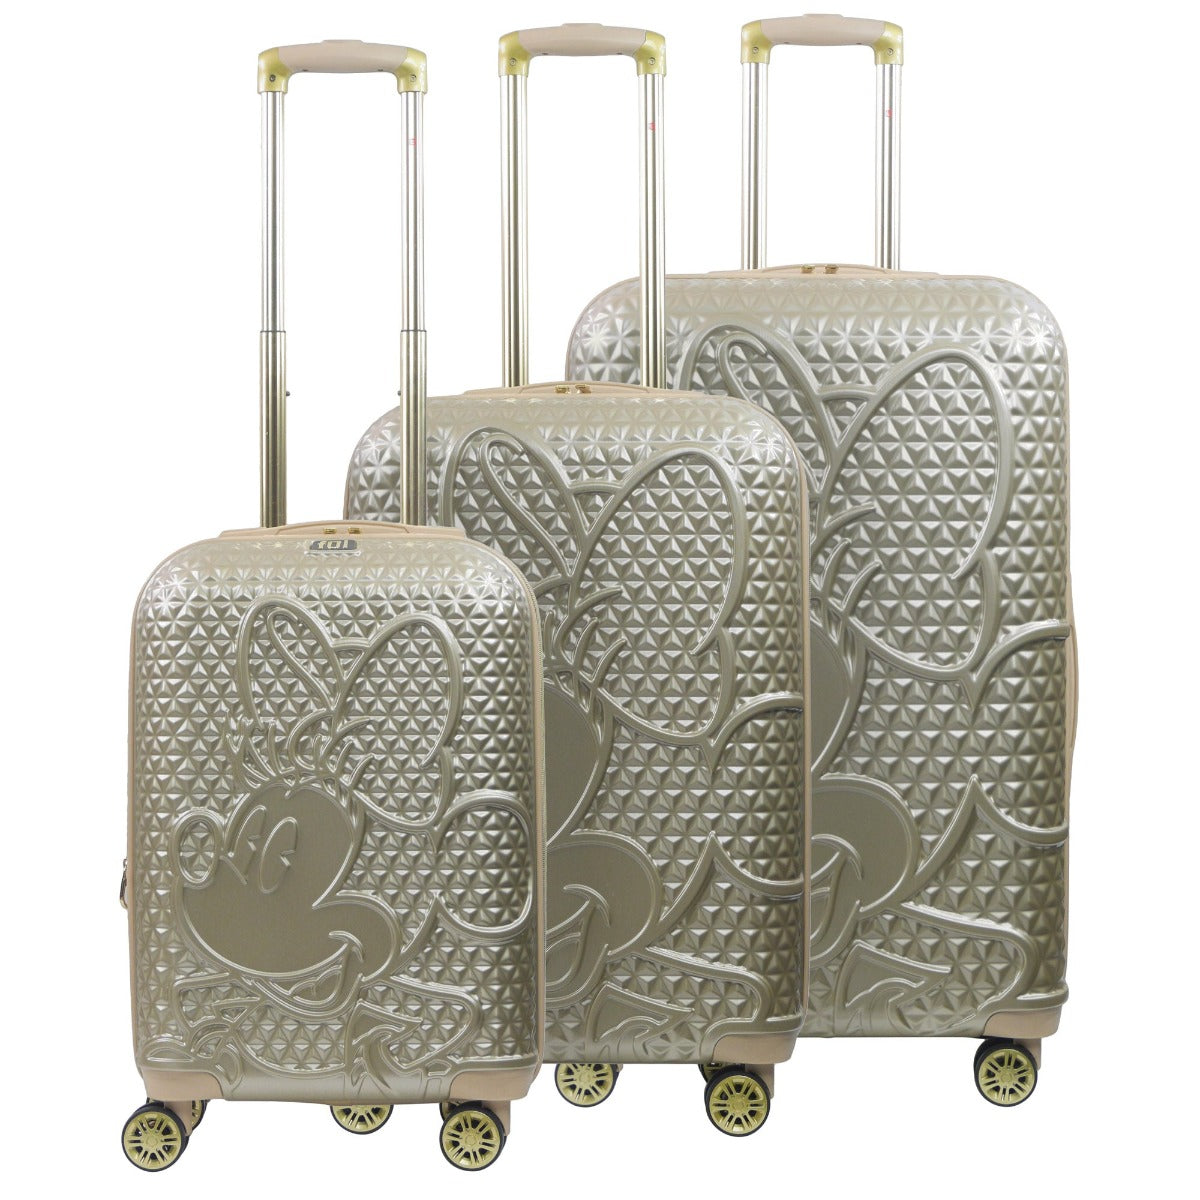 Taupe Ful Disney Minnie Mouse rolling luggage 3 piece set